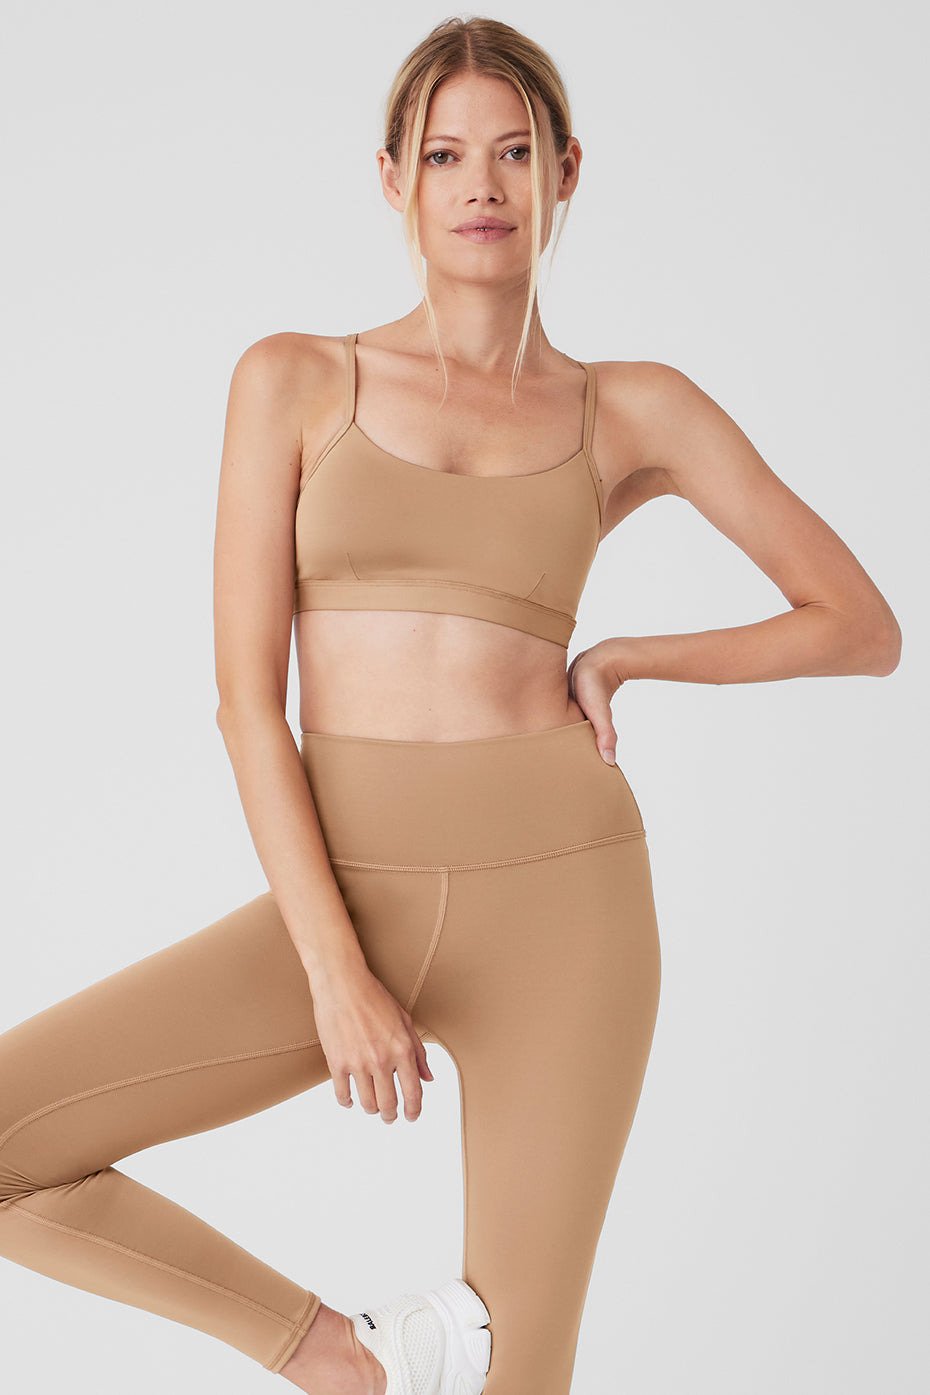 Alo Yoga Airlift Intrigue Bra In Espresso Tan Size M - $49 - From Lizanne